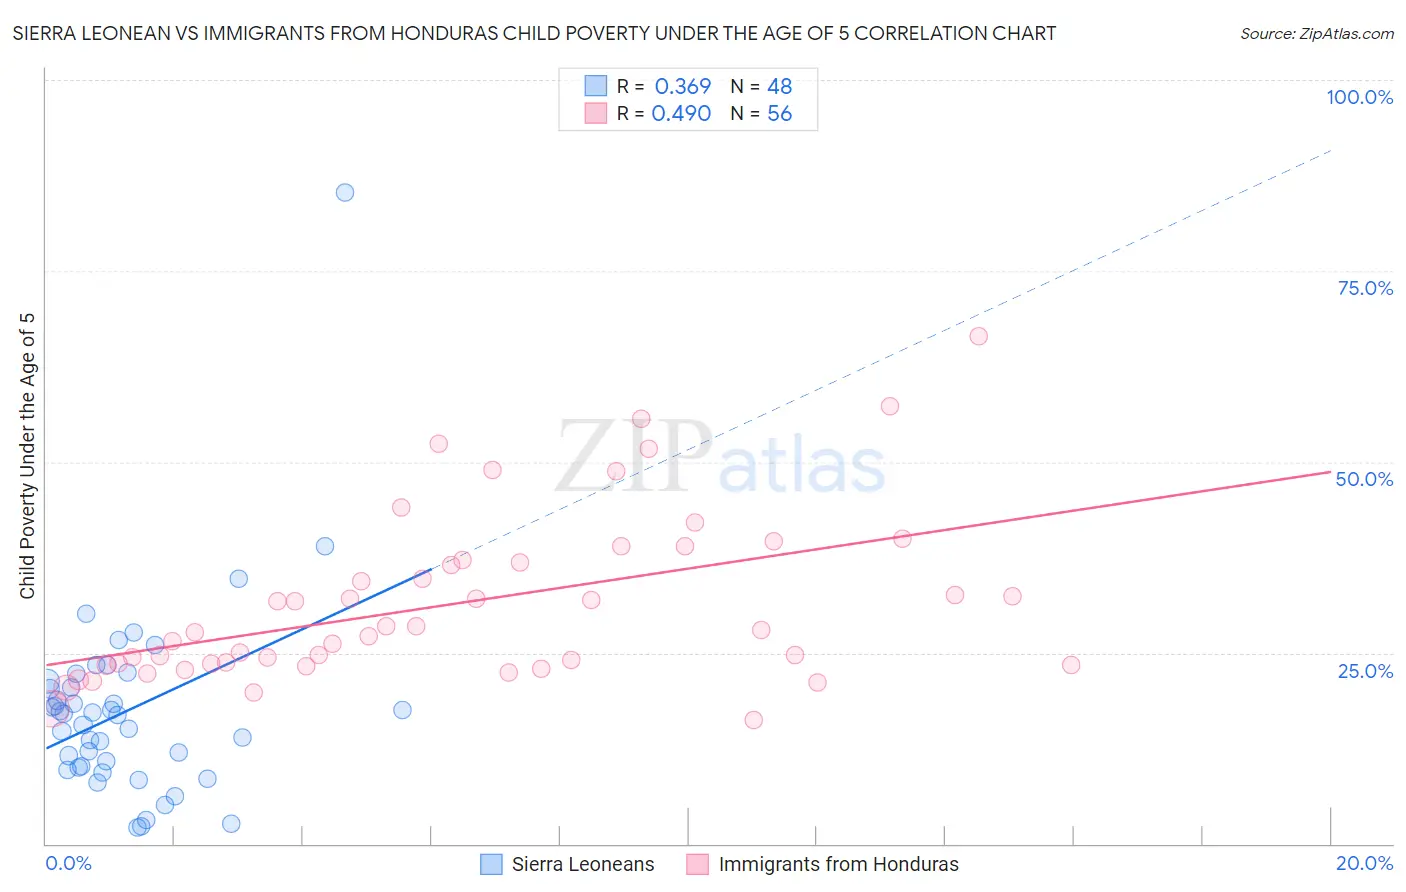 Sierra Leonean vs Immigrants from Honduras Child Poverty Under the Age of 5